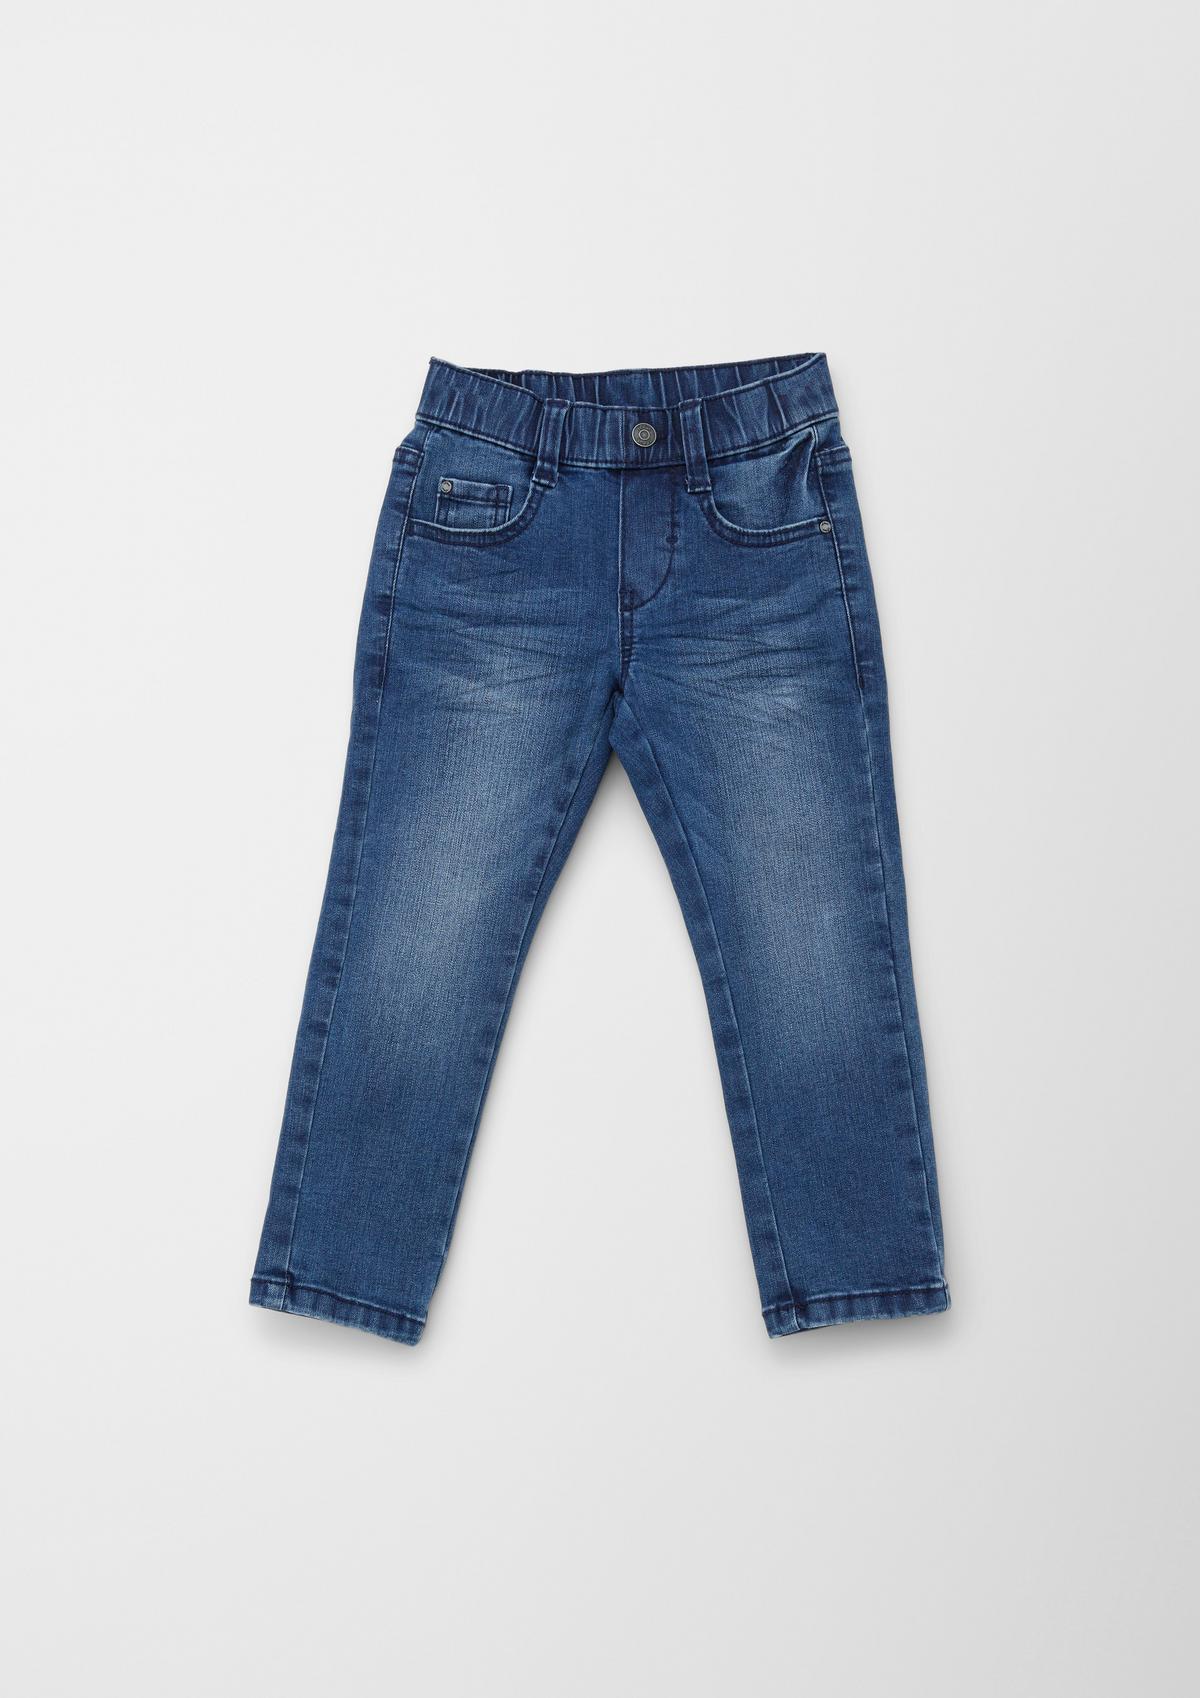 s.Oliver Jeans Shawn / Regular Fit / Mid Rise / Straight Leg